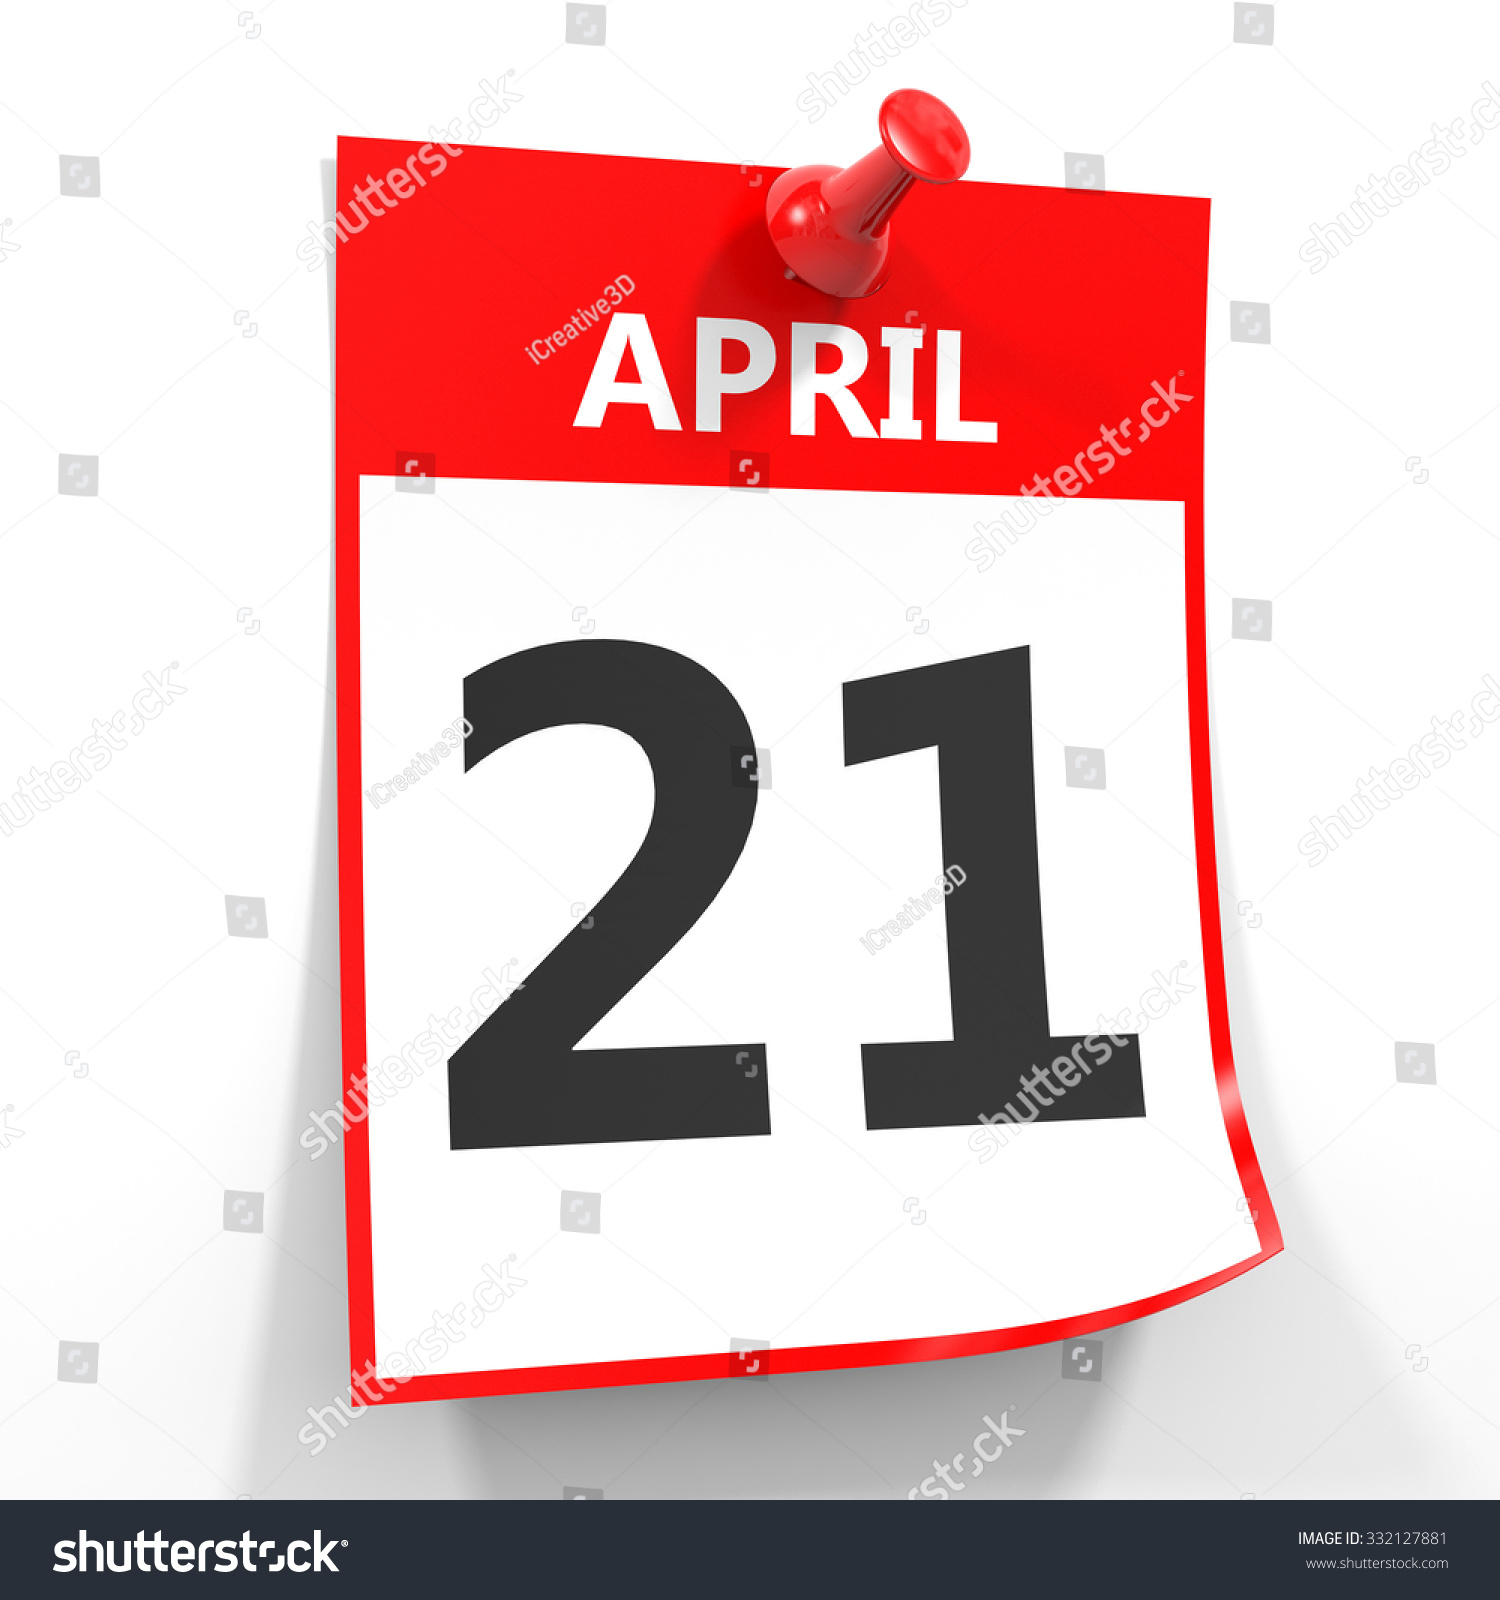 21 April Calendar Sheet With Red Pin On White Background. Illustration ...